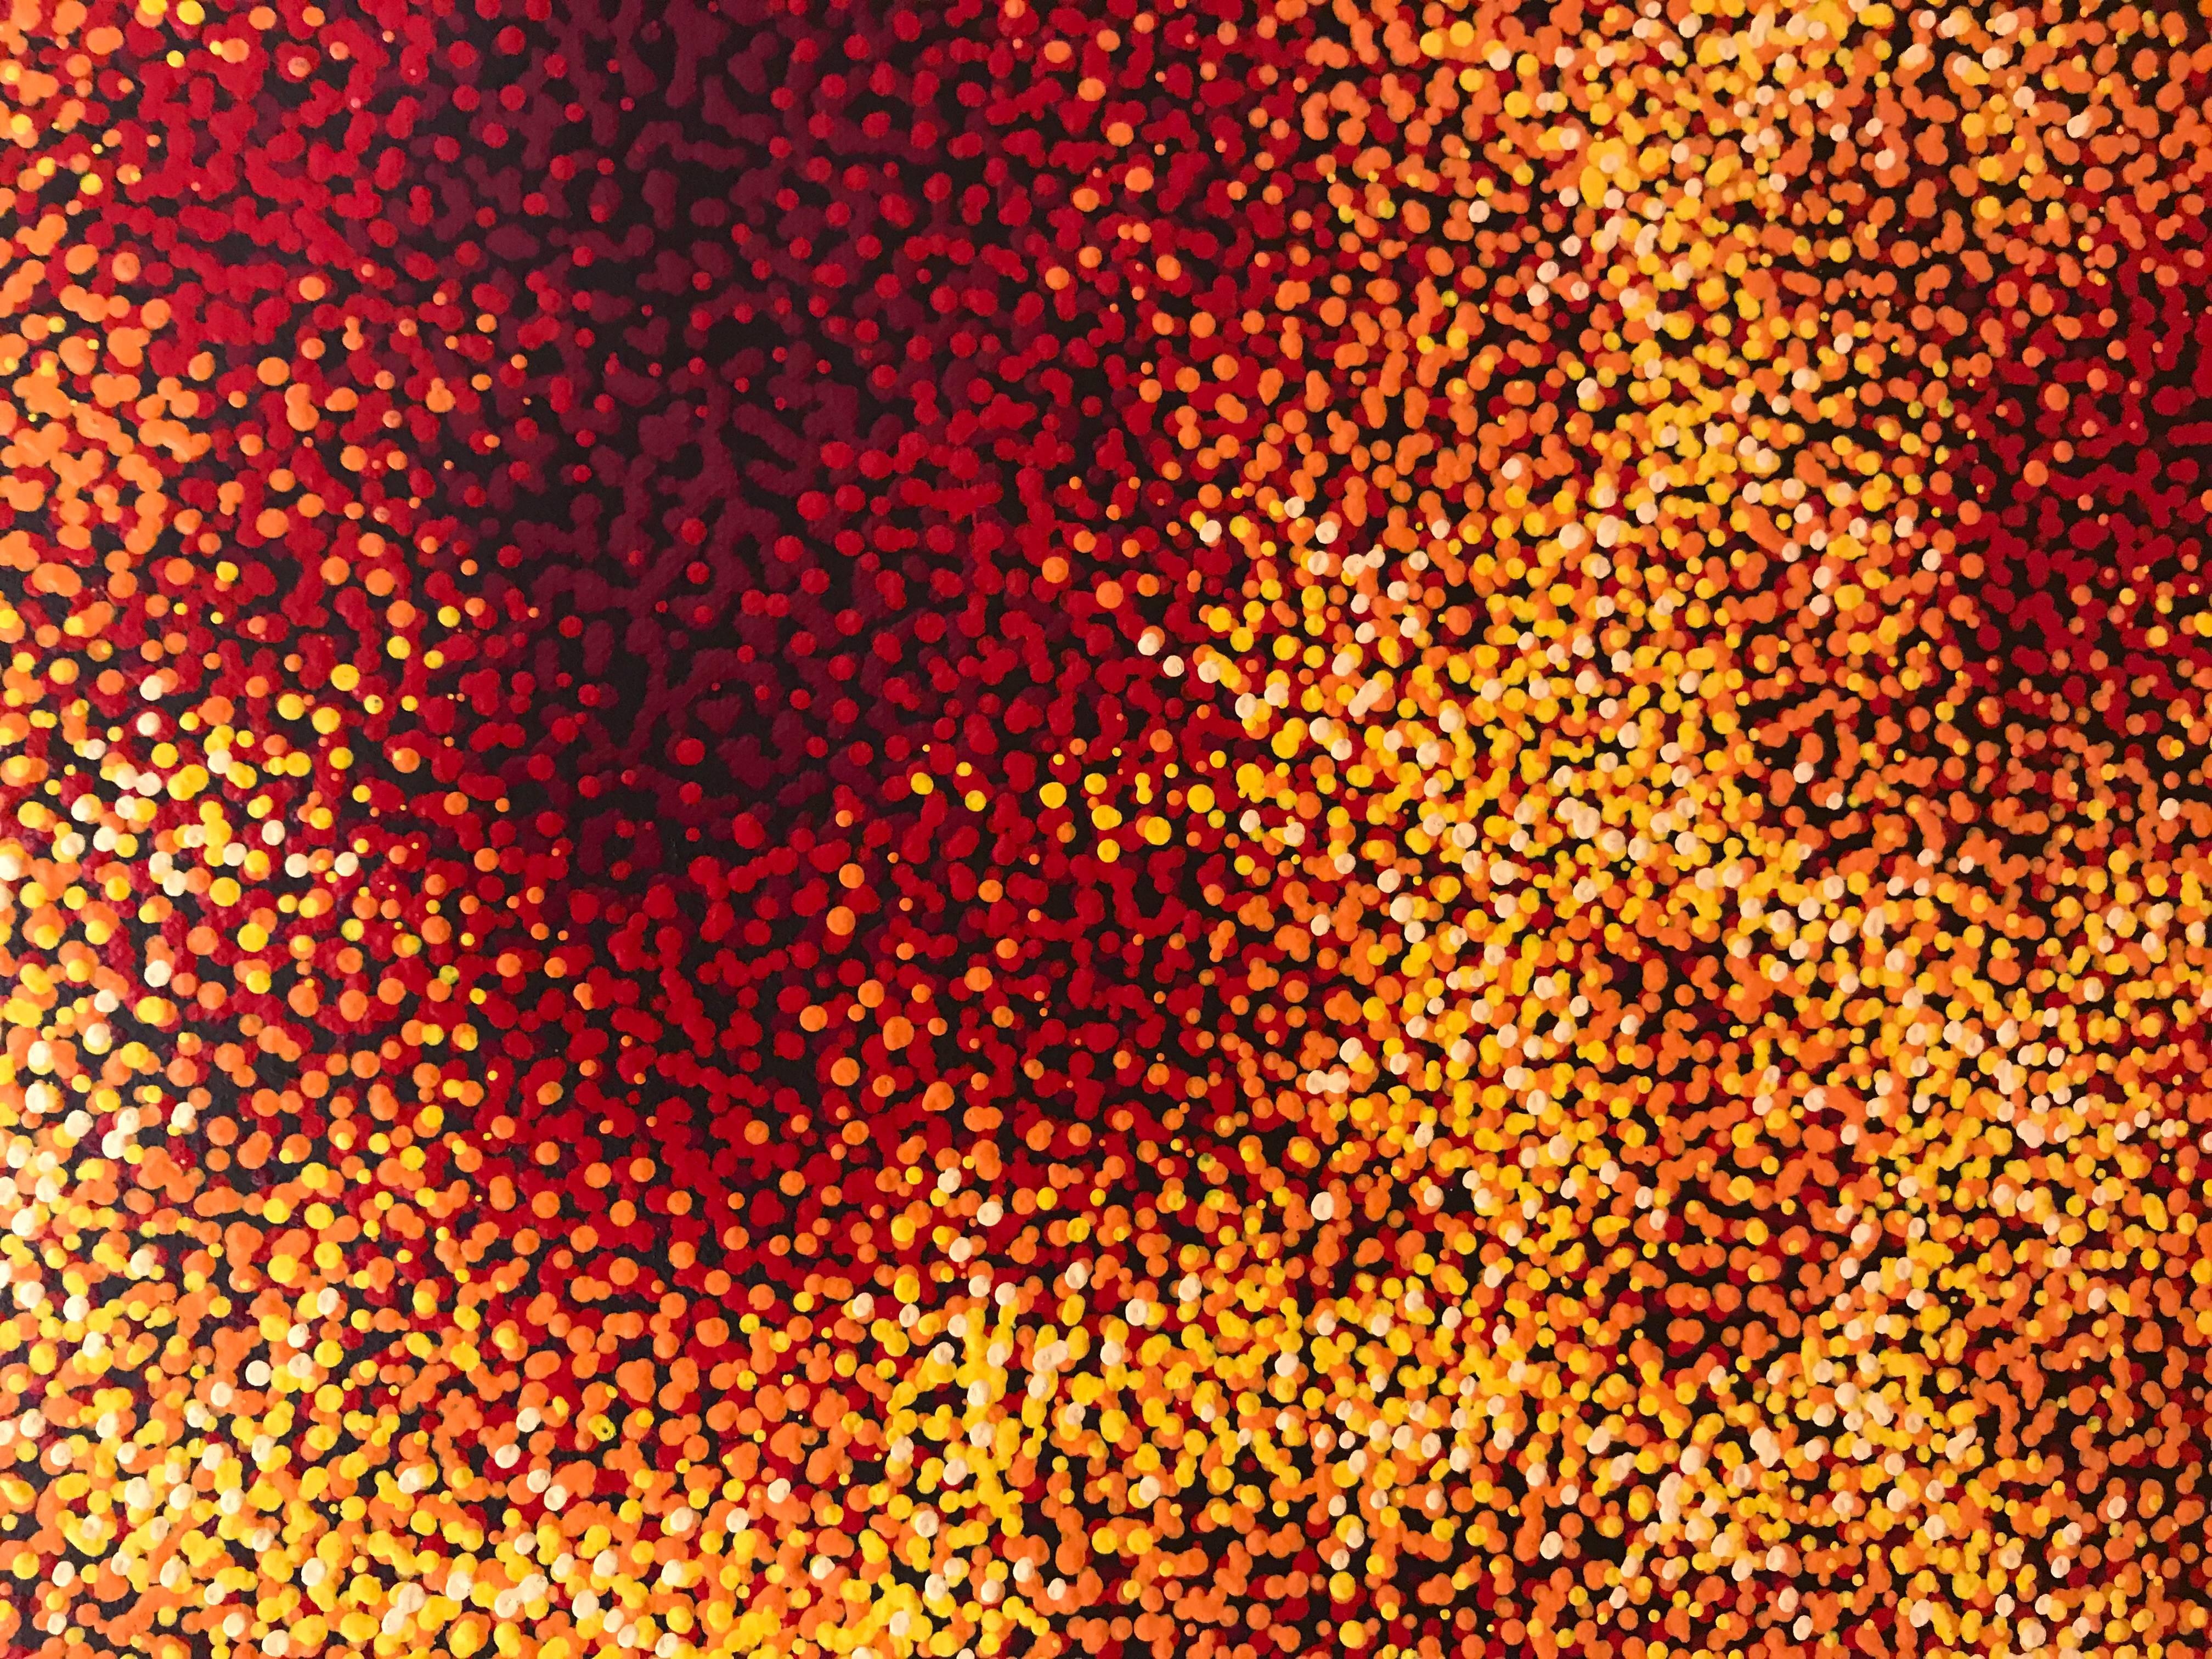 This painting represents a Fire Dreaming Ceremony, where Tarisse employs intense reds, oranges and yellows depicting a sacred burning of the land as a religious ritual. Tarisse’s father had told her that fire was the element that connected her to